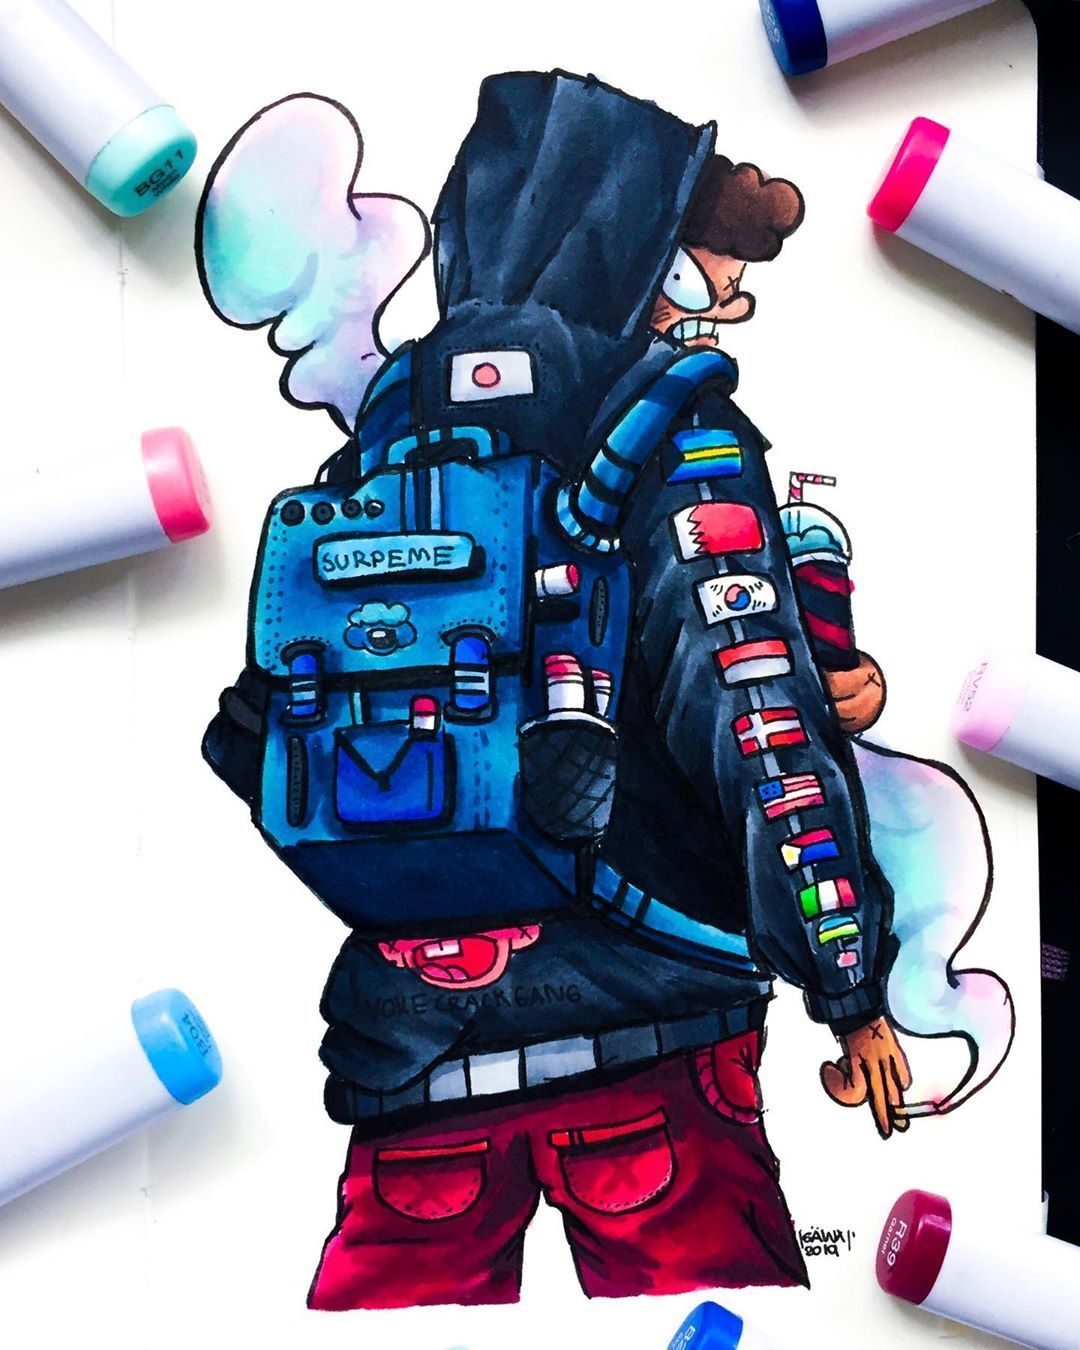 Gawx Art on Instagram: “Man with his bottle of paint water, crazy hoodie with flags and brand new Surpeme. Cute doodle art, Doodle art drawing, Graffiti style art